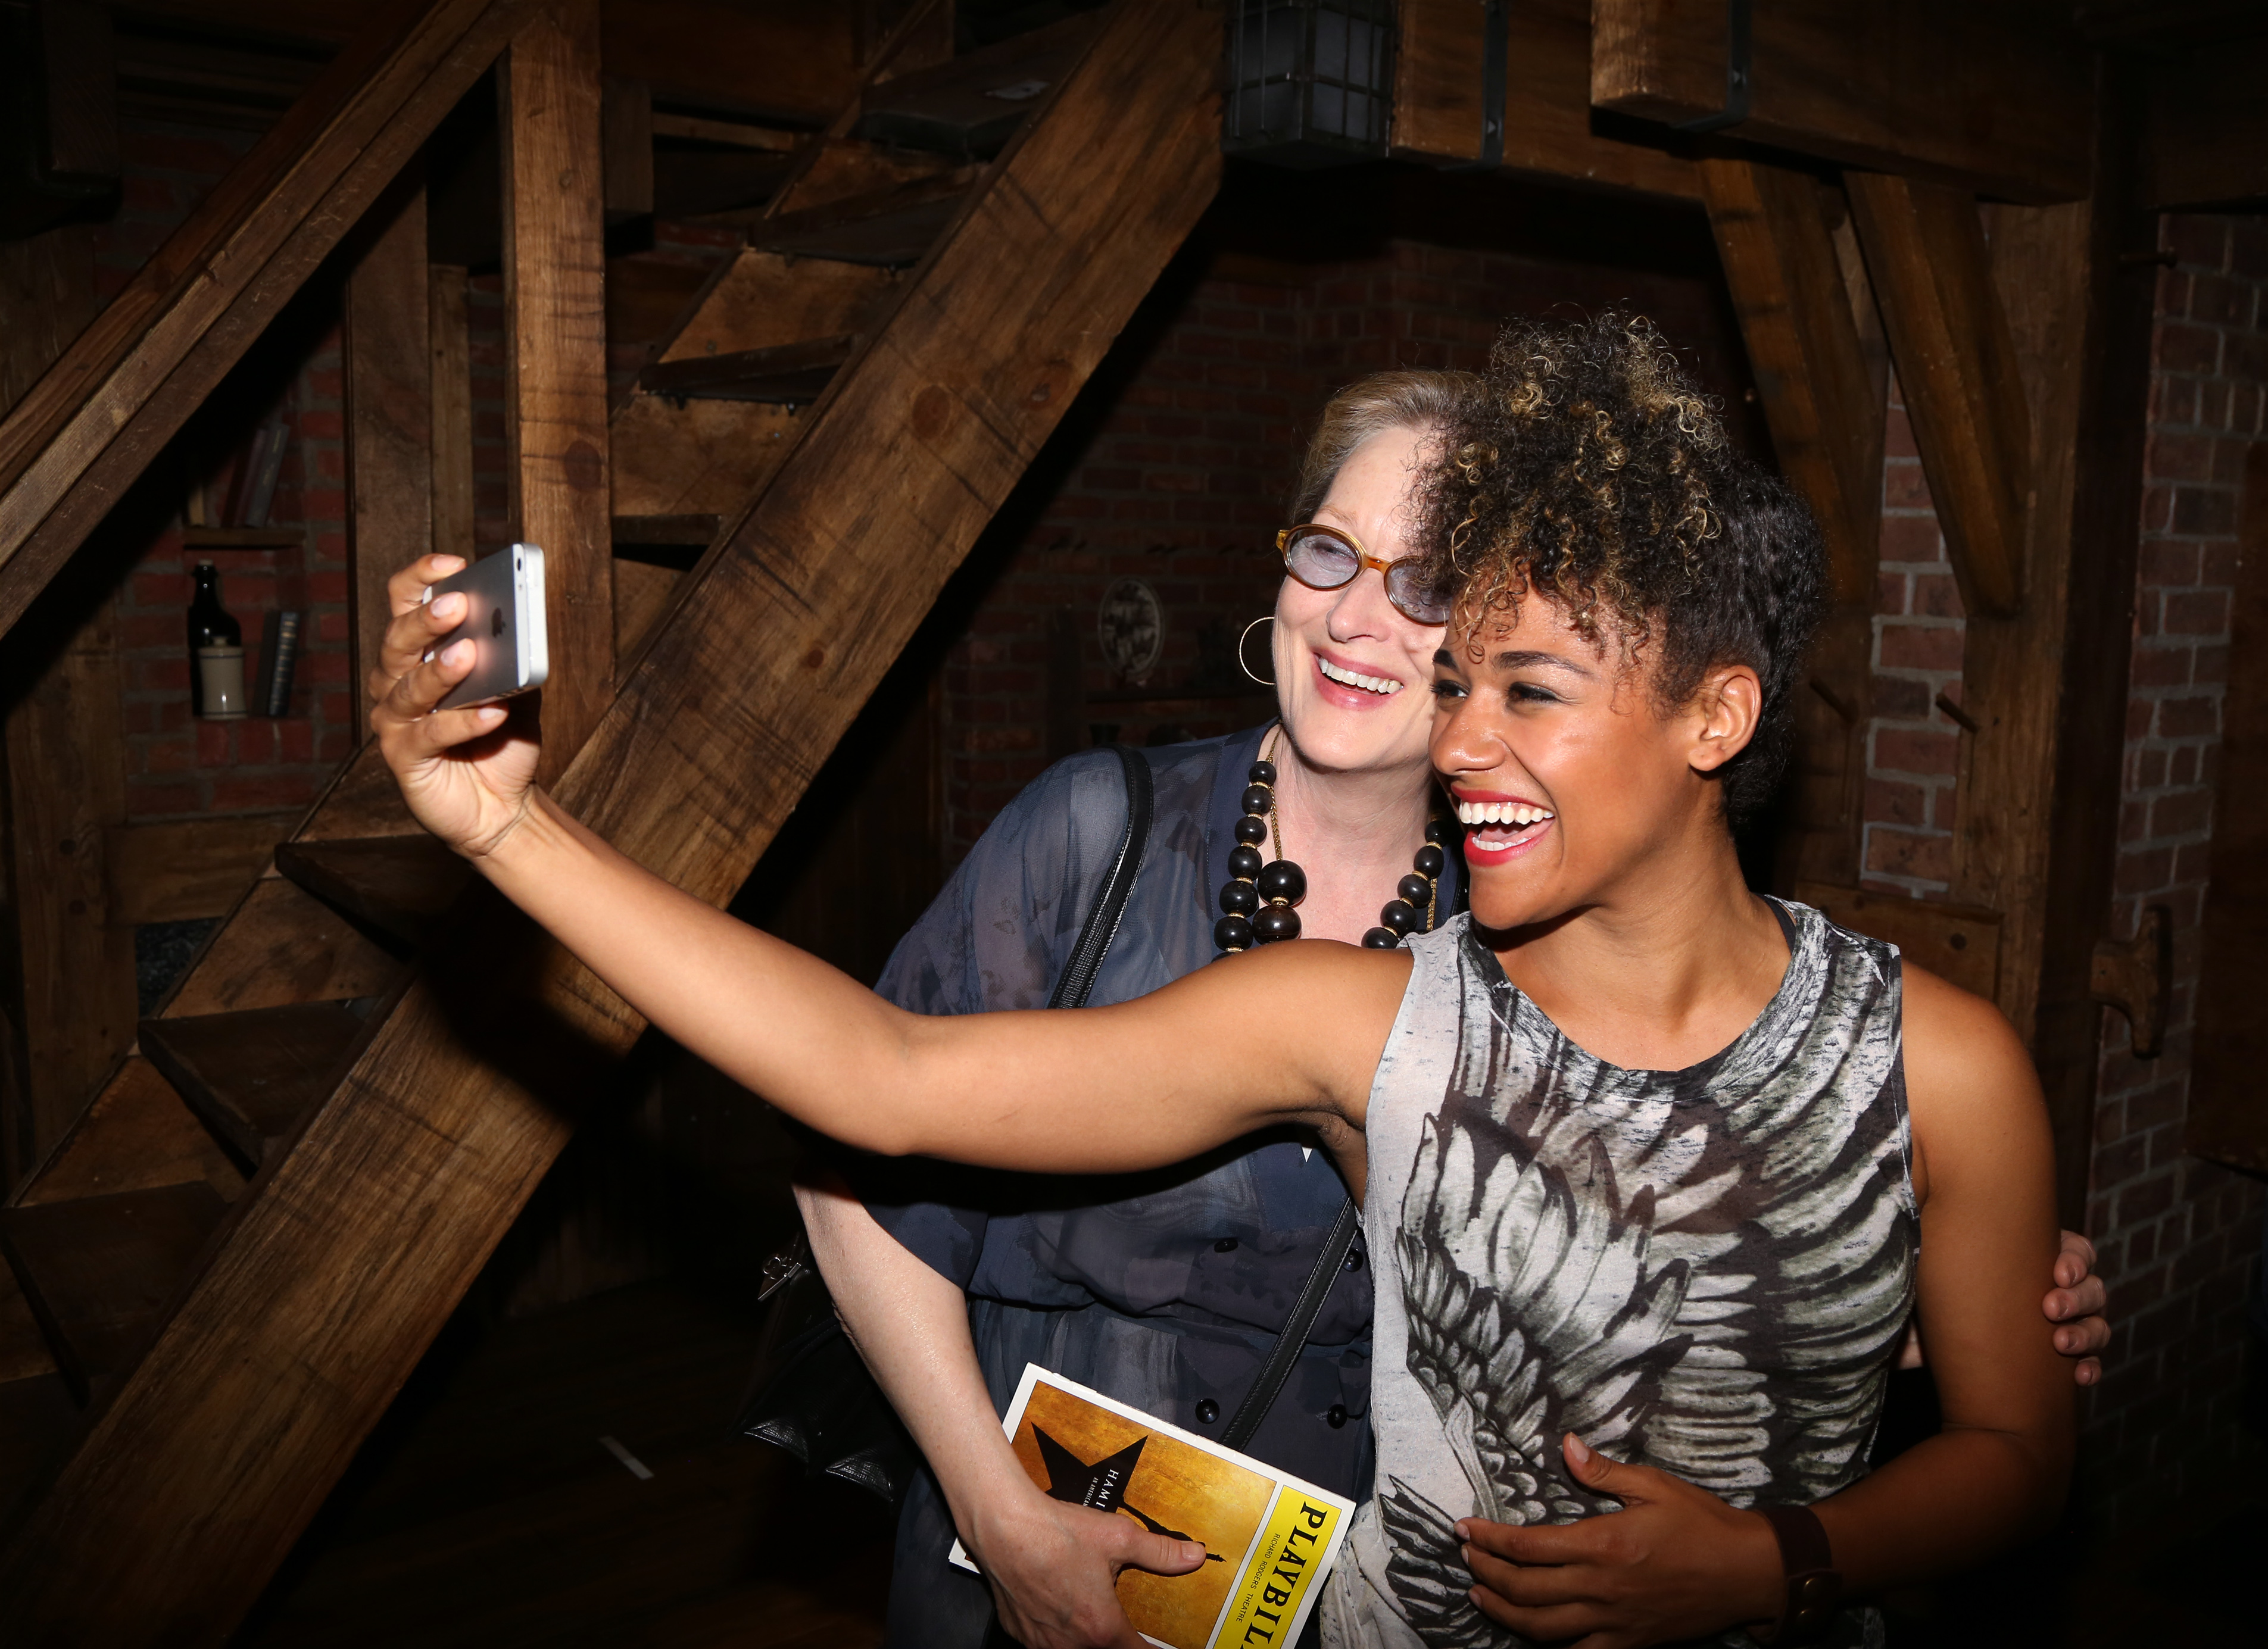 Meryl Streep visits Emmy Raver-Lampman from the cast of "Hamilton" backstage after a performance at the Richard Rodgers Theatre, on August 13, 2015 in New York City. | Source: Getty Images